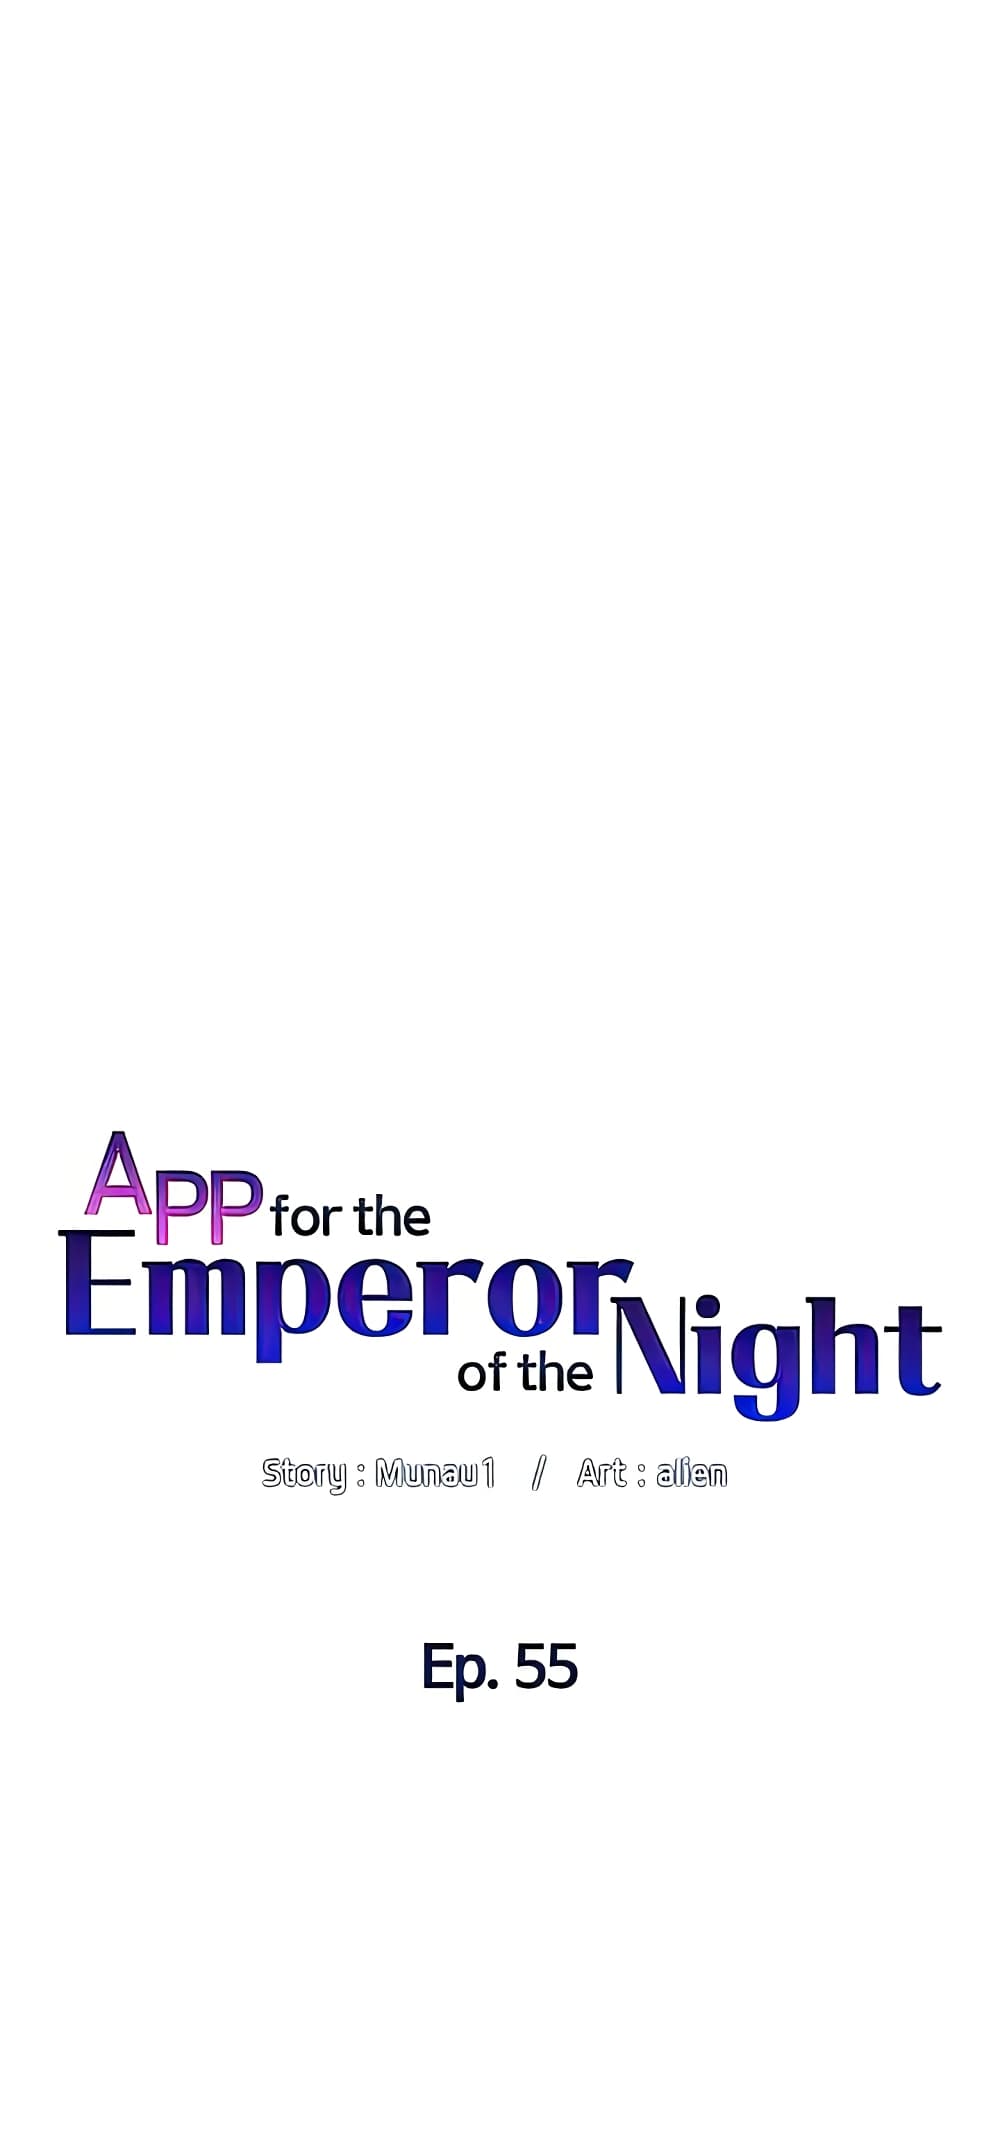 APP for the Emperor of the Night 55-55